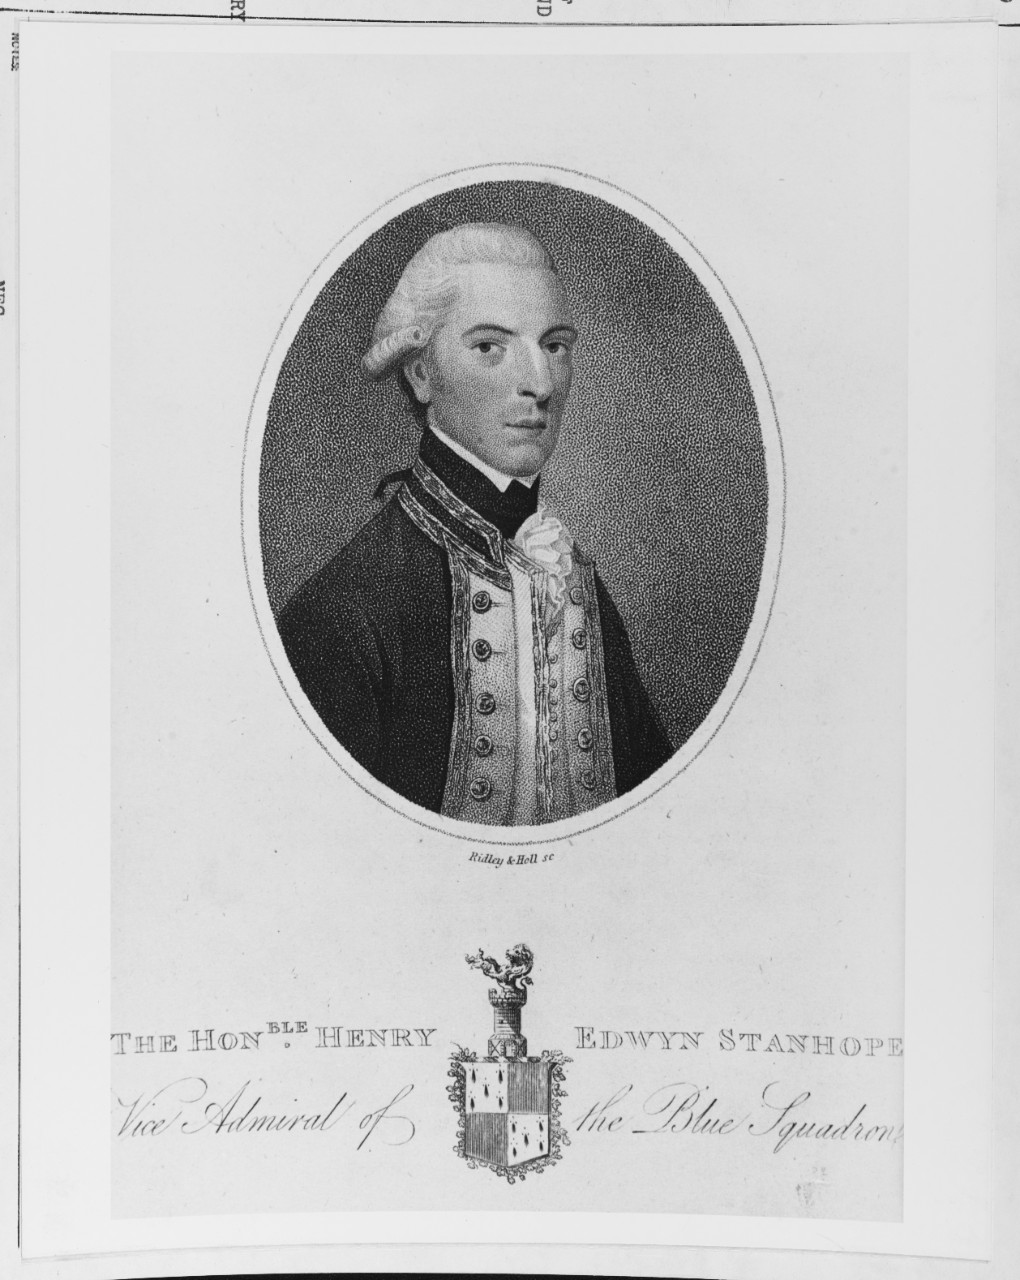 Henry Edwin Stanhope Vice Admiral, R.N